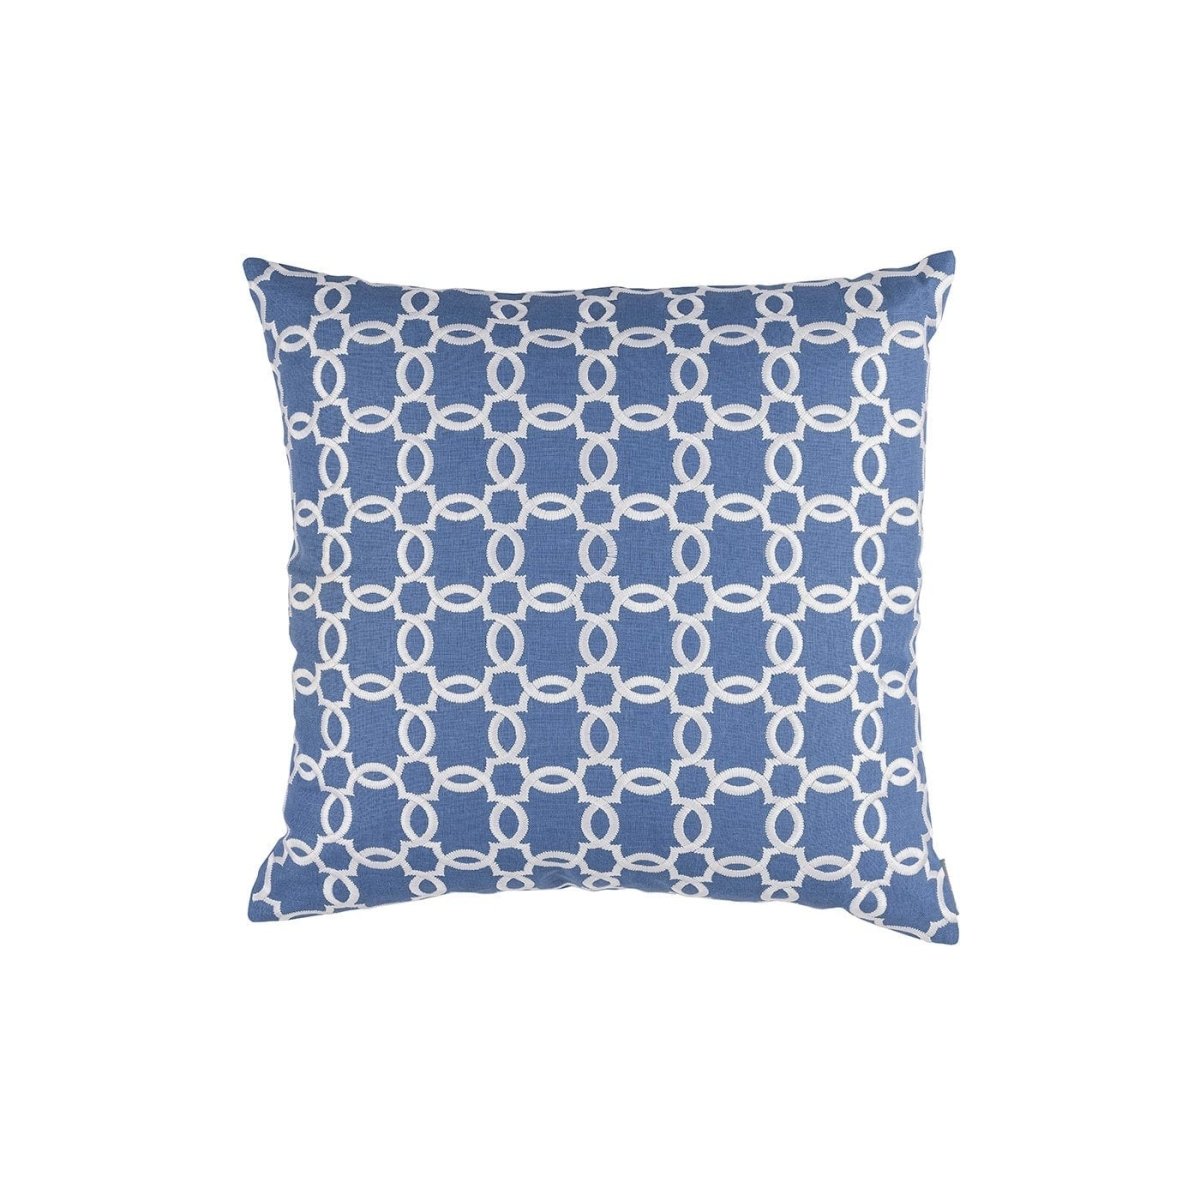 Lynx Azure & White Decorative Pillow by Lili Alessandra | Fig Linens